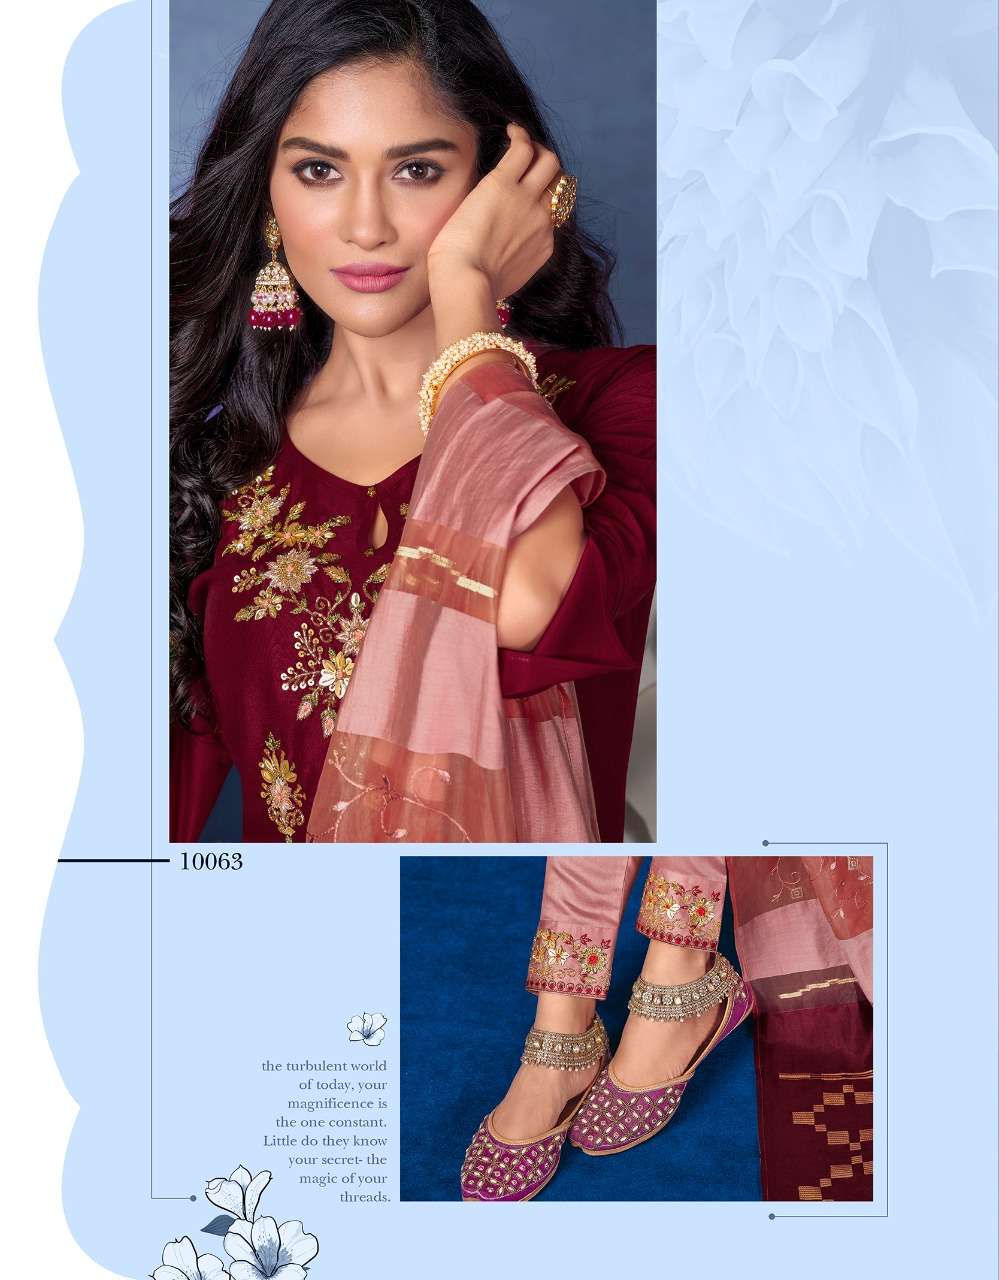 lily&lali magnum vol-2 10061-10066 series bemberg silk fancy handwrok full stich collection surat